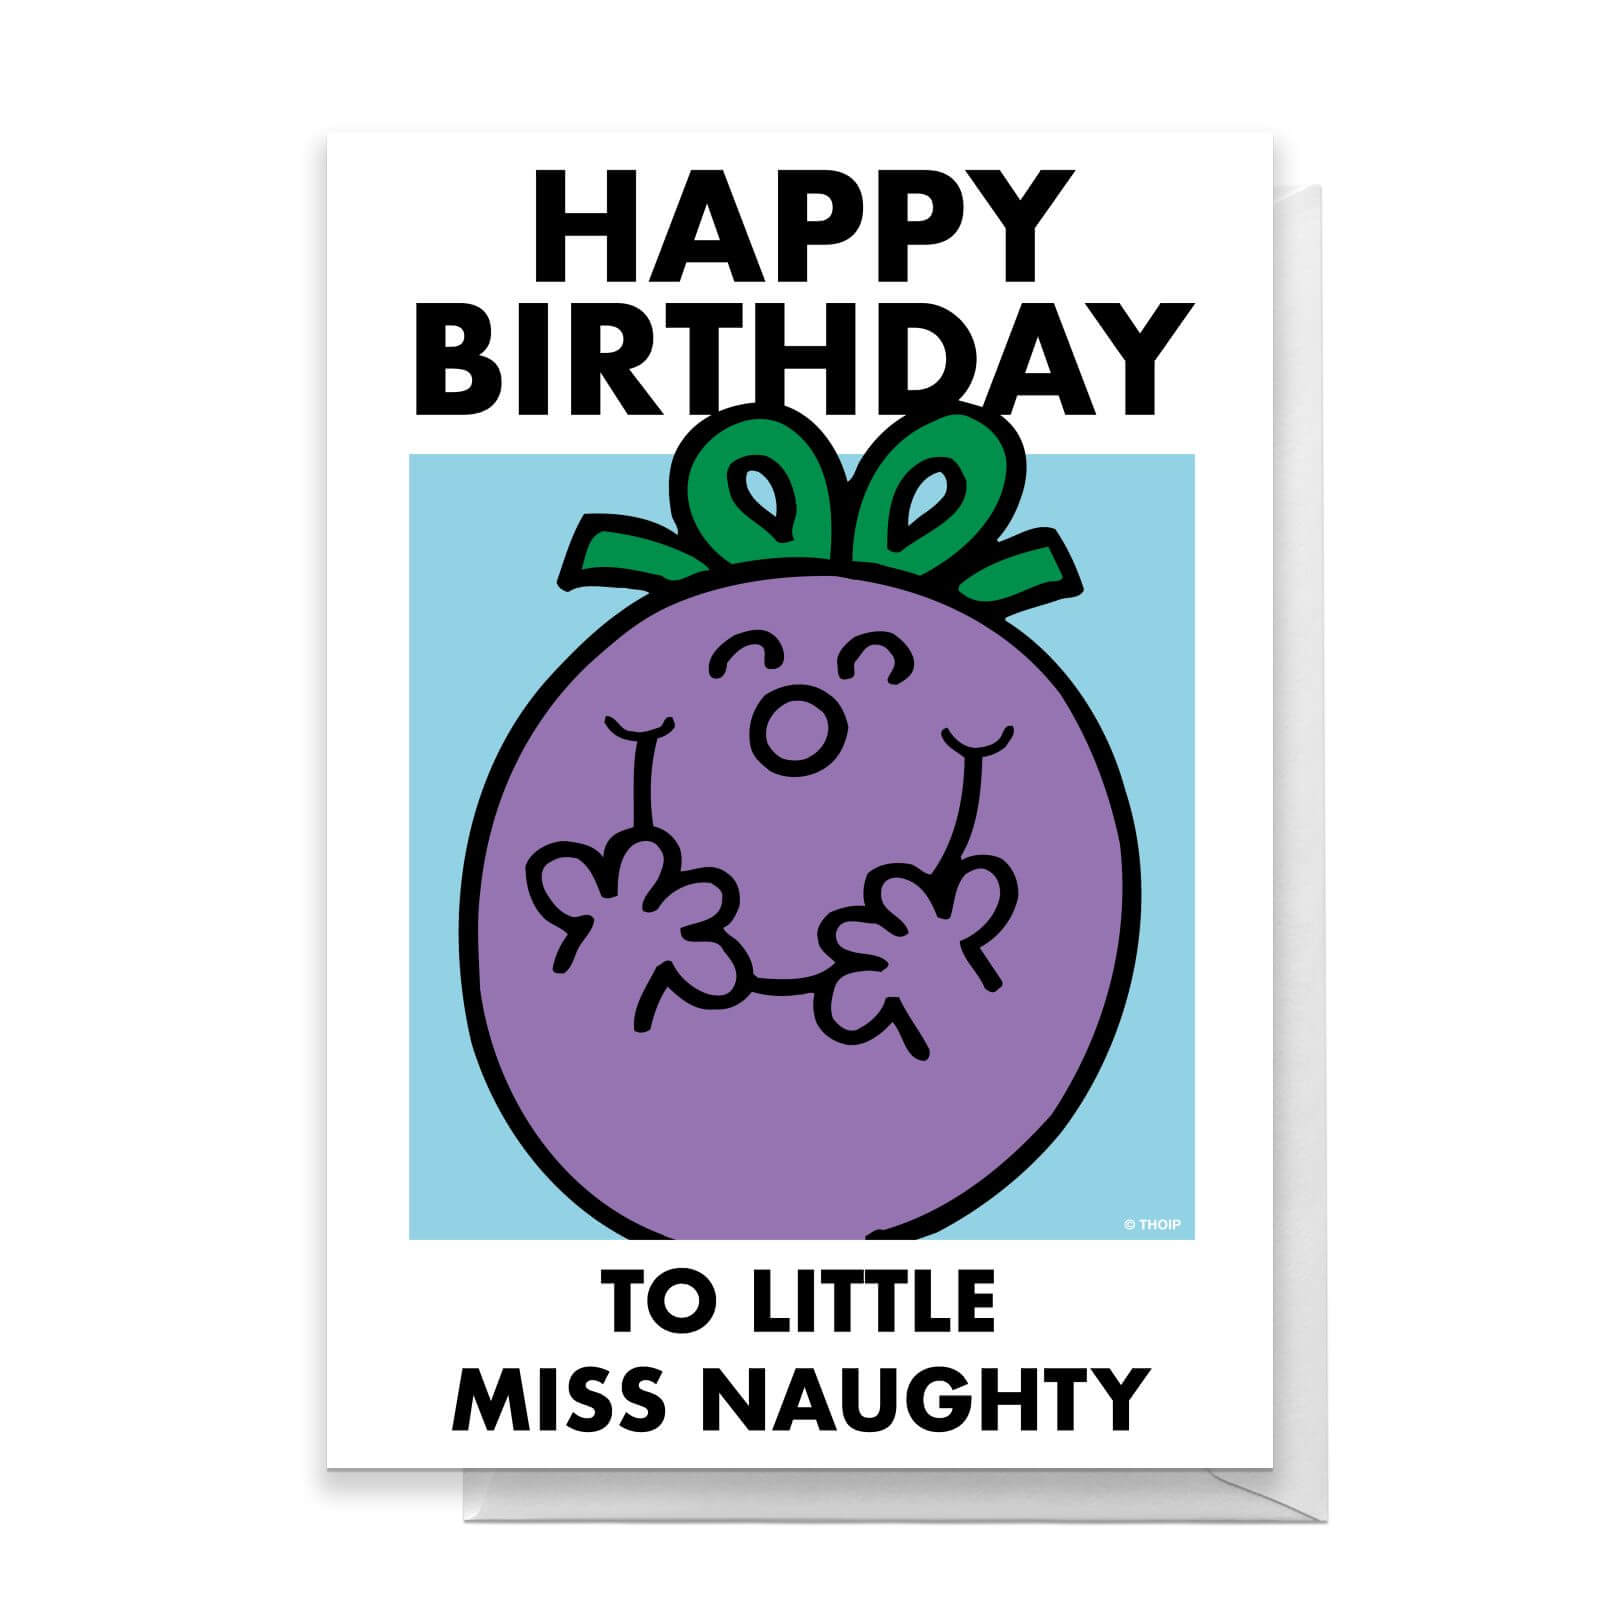 Mr Men & Little Miss Happy Birthday To Little Miss Naughty Greetings Card - Standard Card